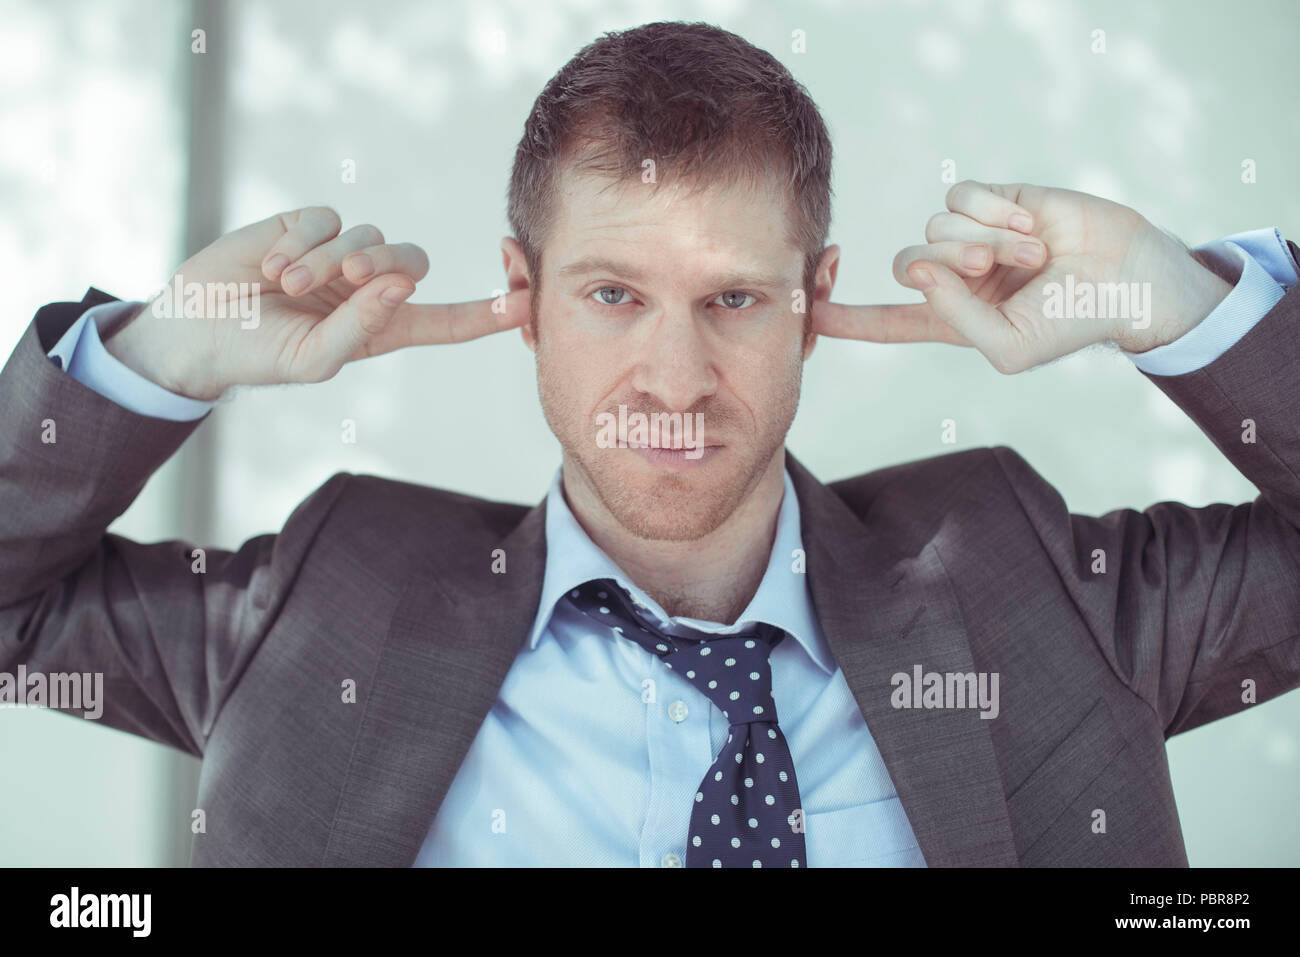 Caucasian male in his 30's wearing a grey suit, unbuttoned shirt and loosened tie,with a serious facial expression, covering his ears with two fingers. Stock Photo